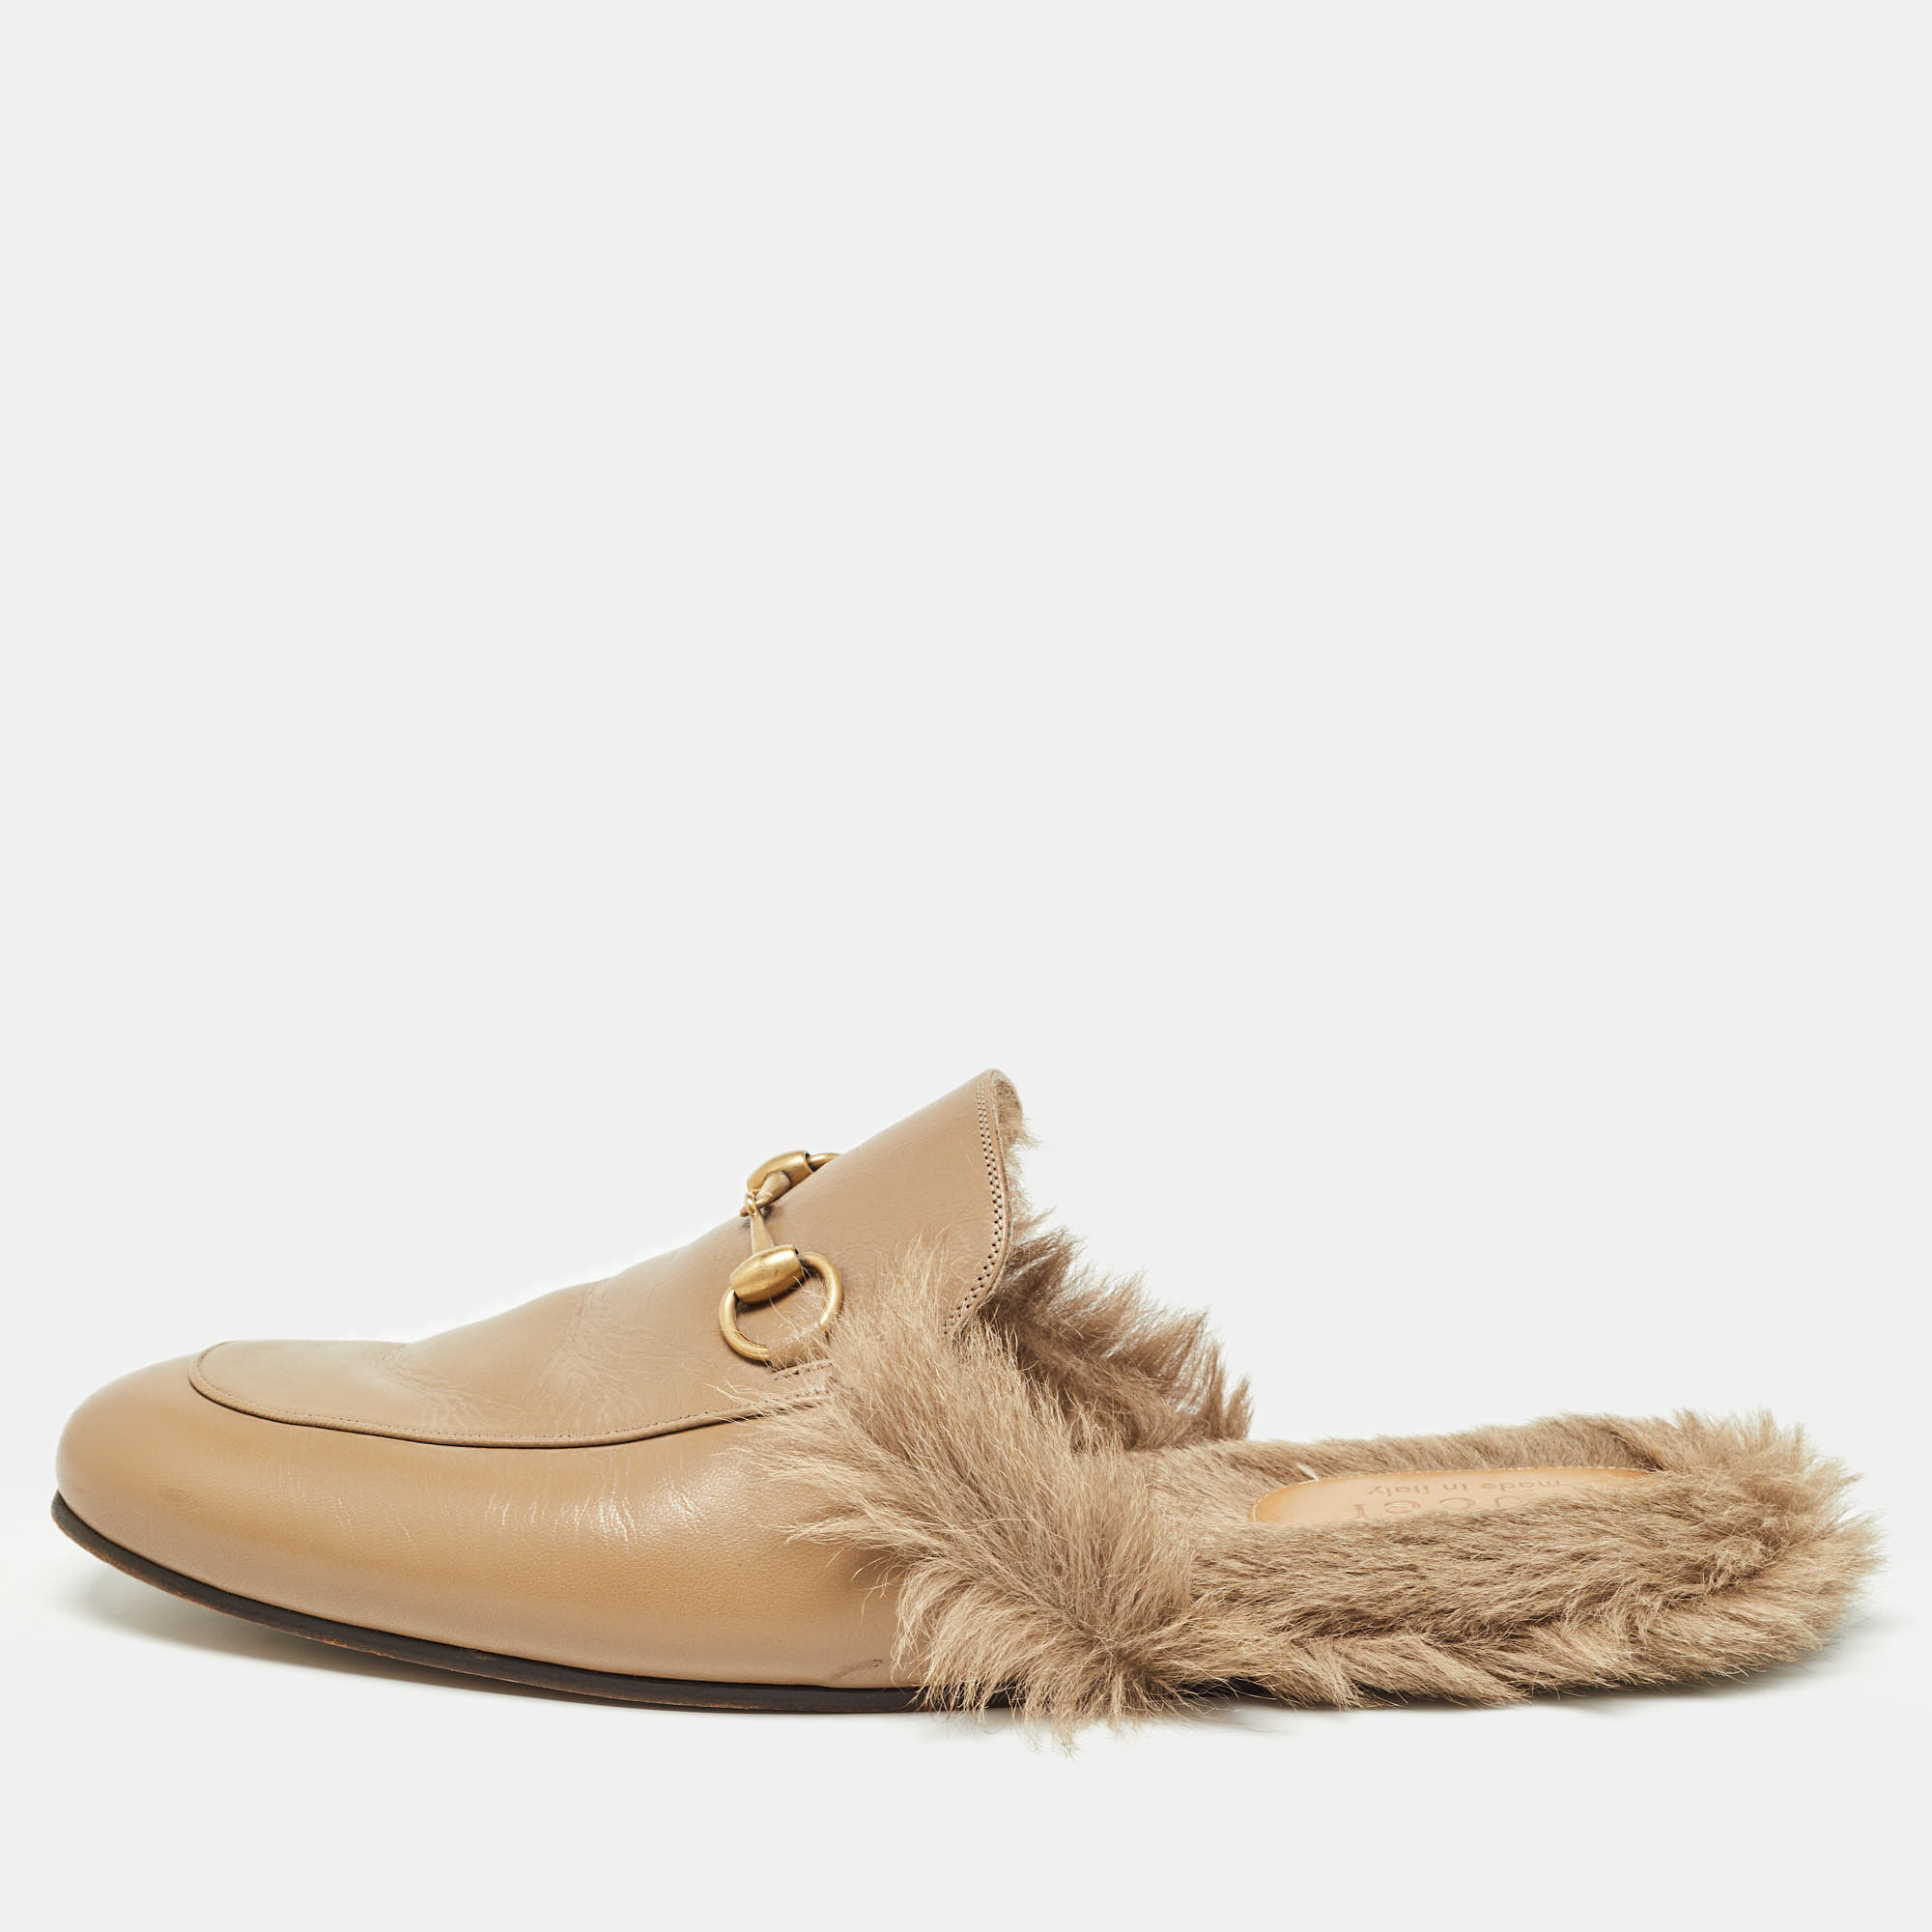 Gucci brown leather and fur princetown mules size 46